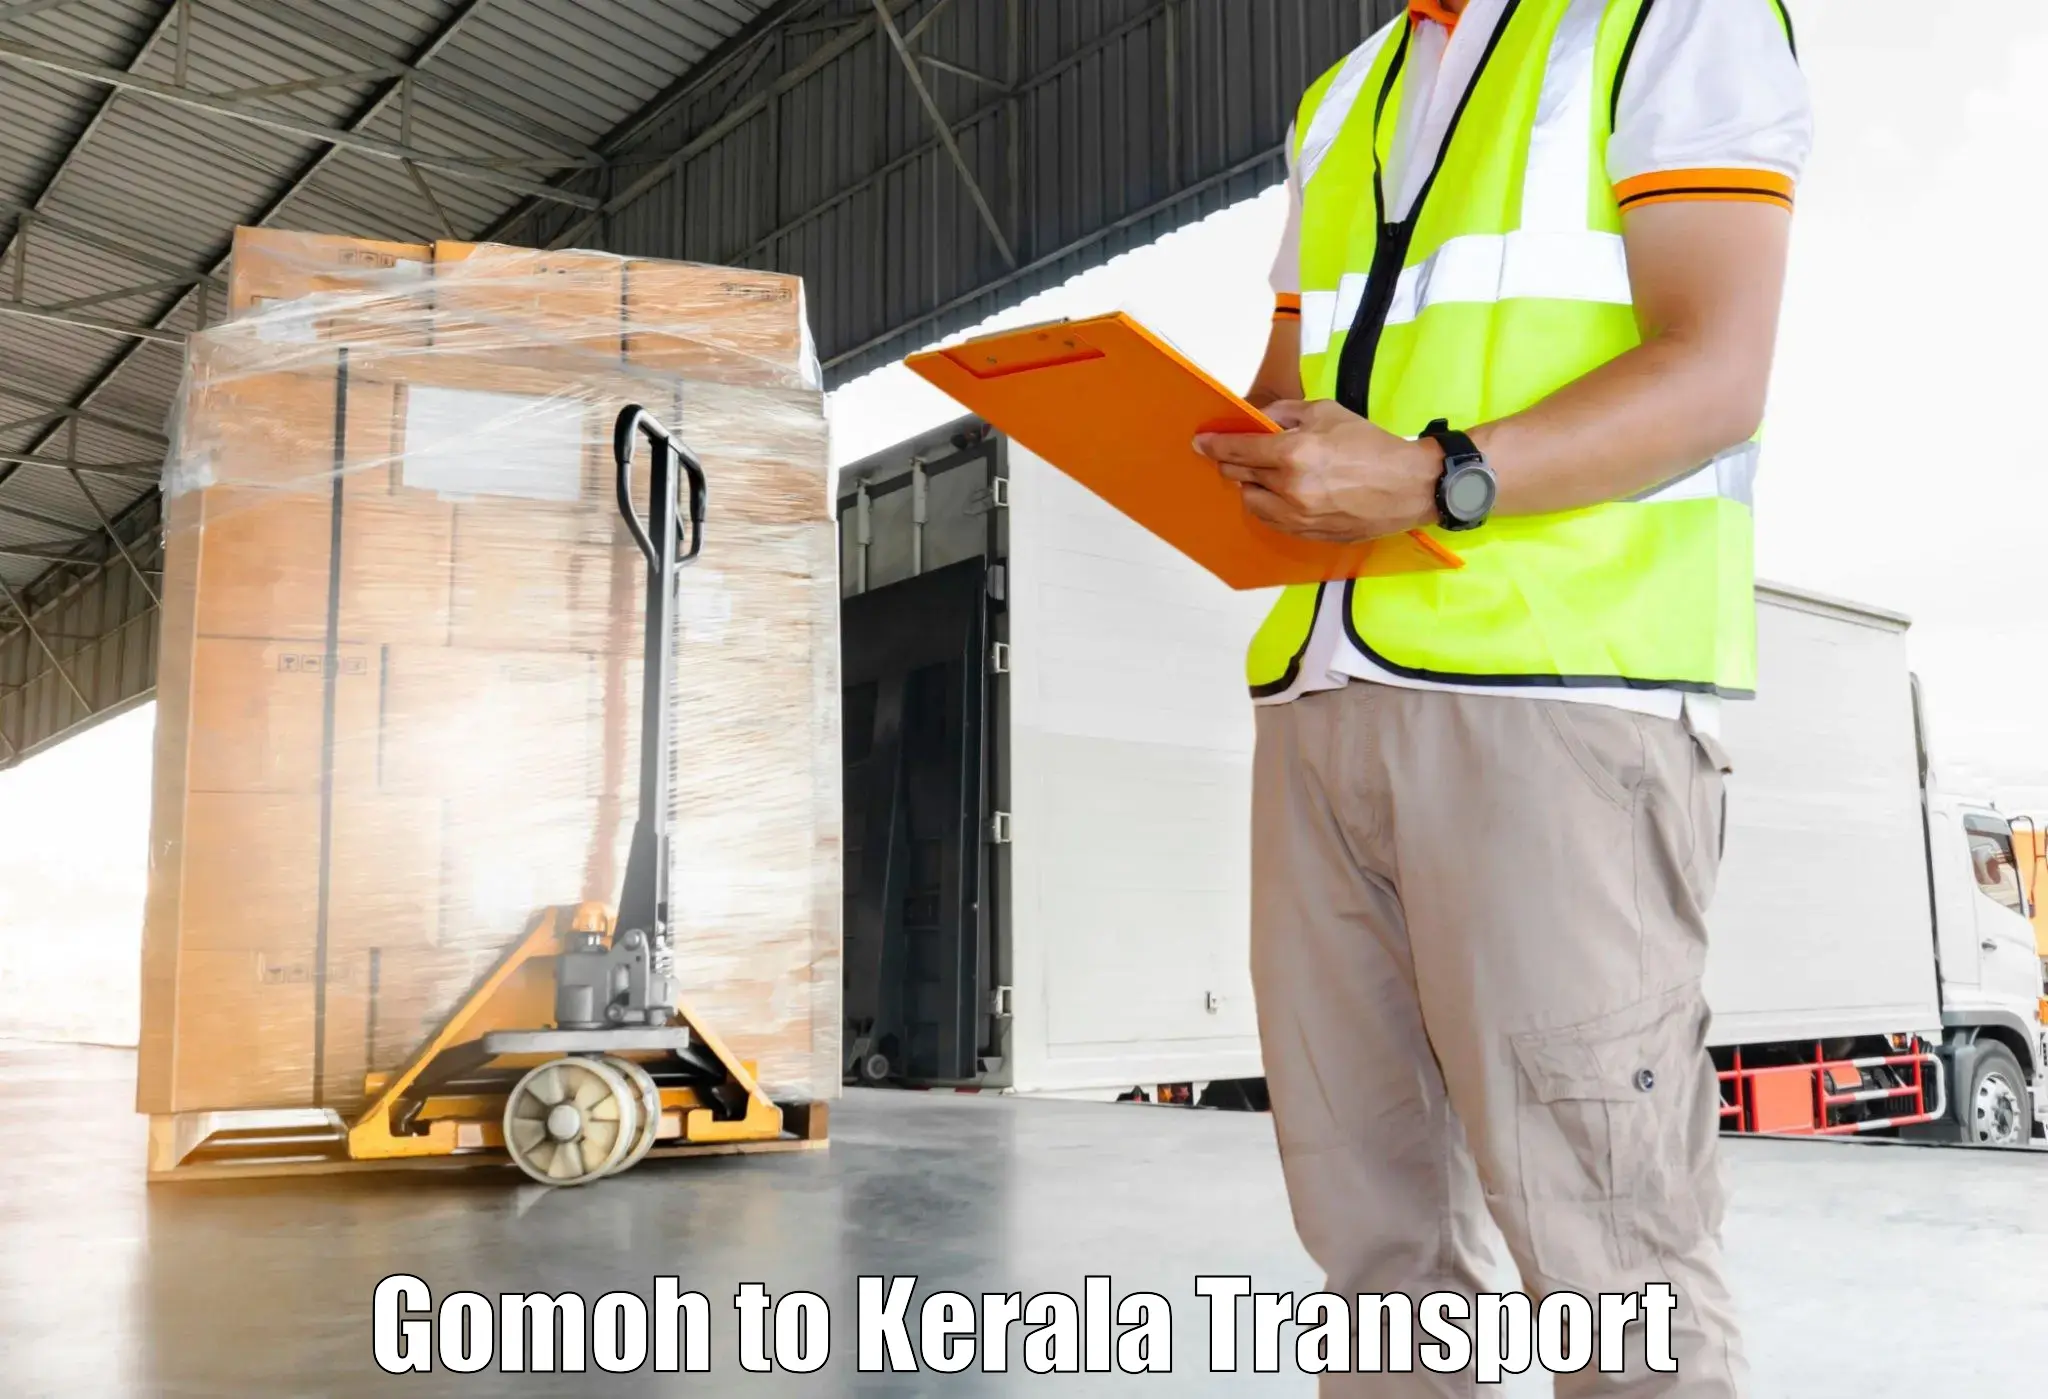 Nationwide transport services Gomoh to Kozhikode